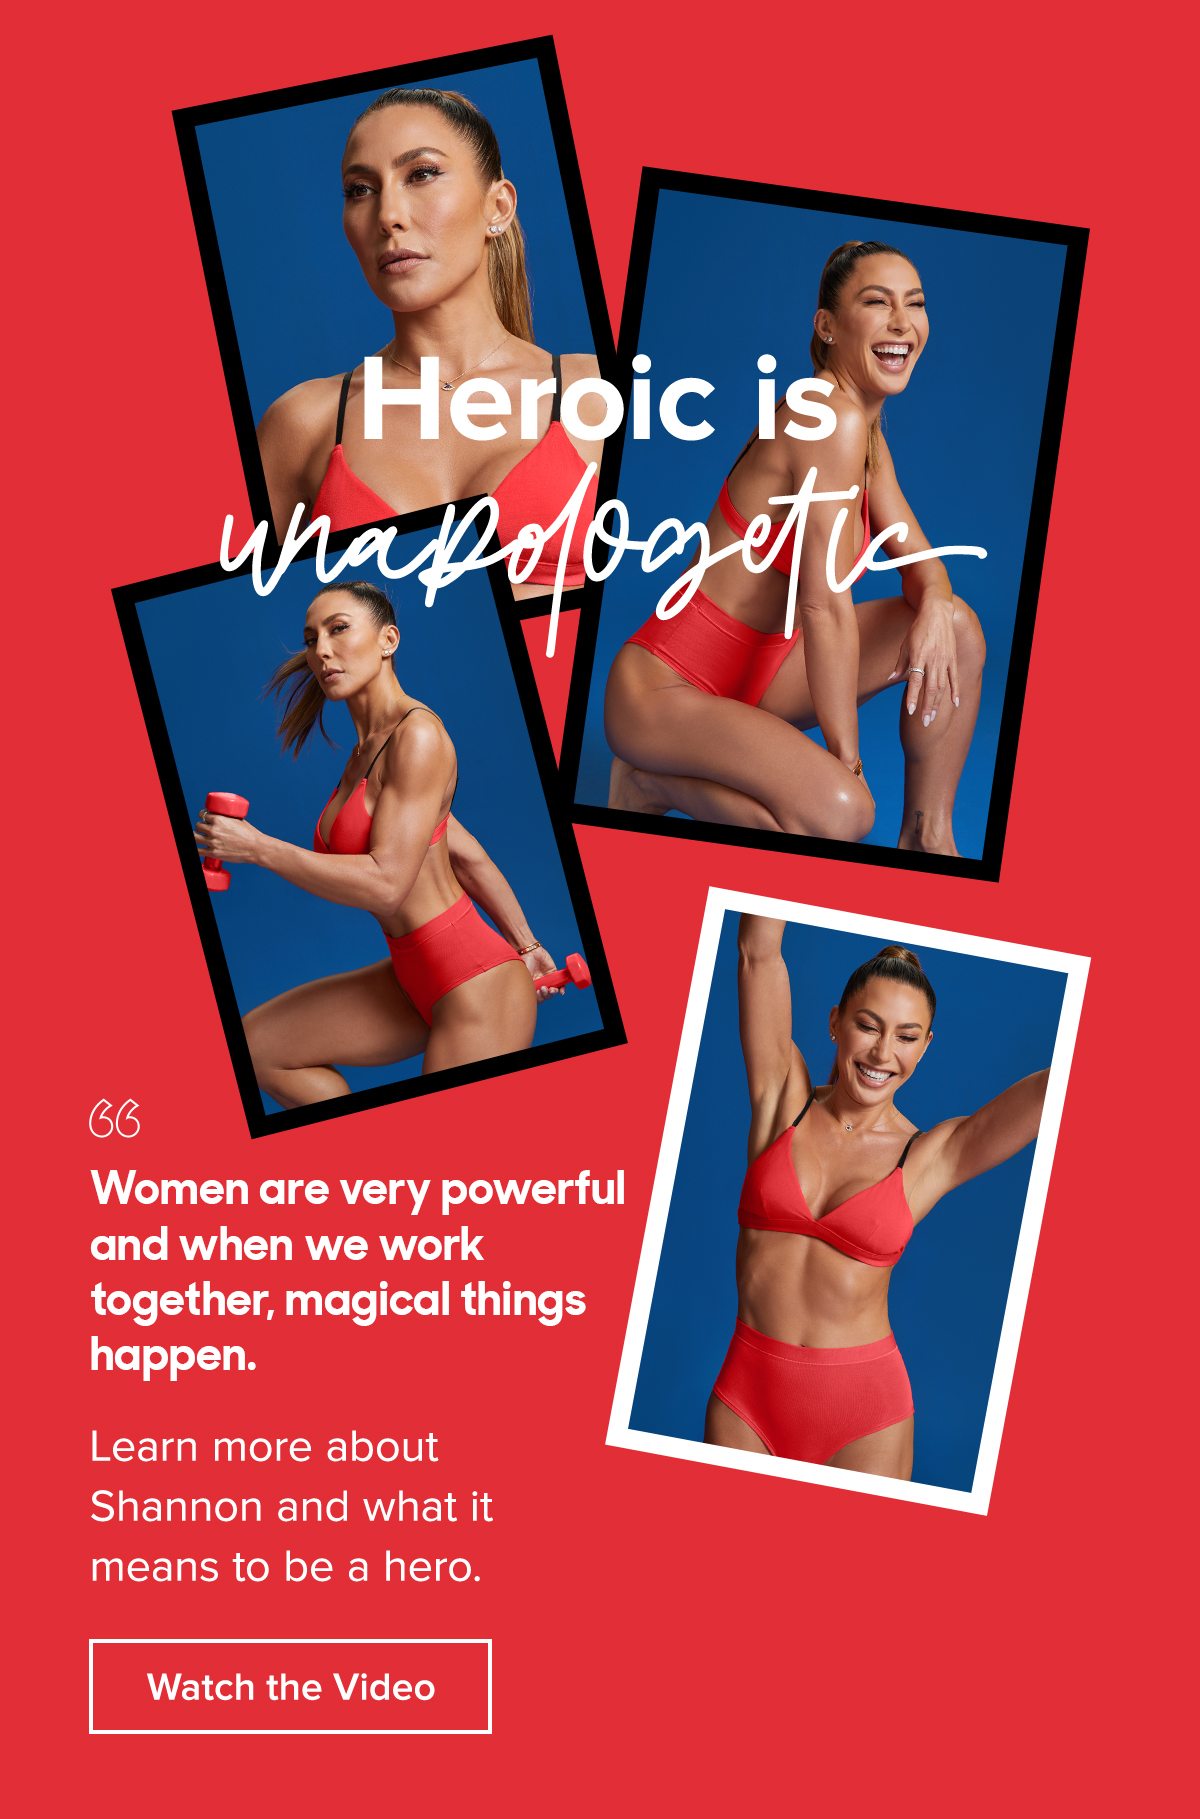 Heroic is unapologetic Women are very powerful and when we work together, magical things happen. Learn more about Shannon and what it means to be a hero.